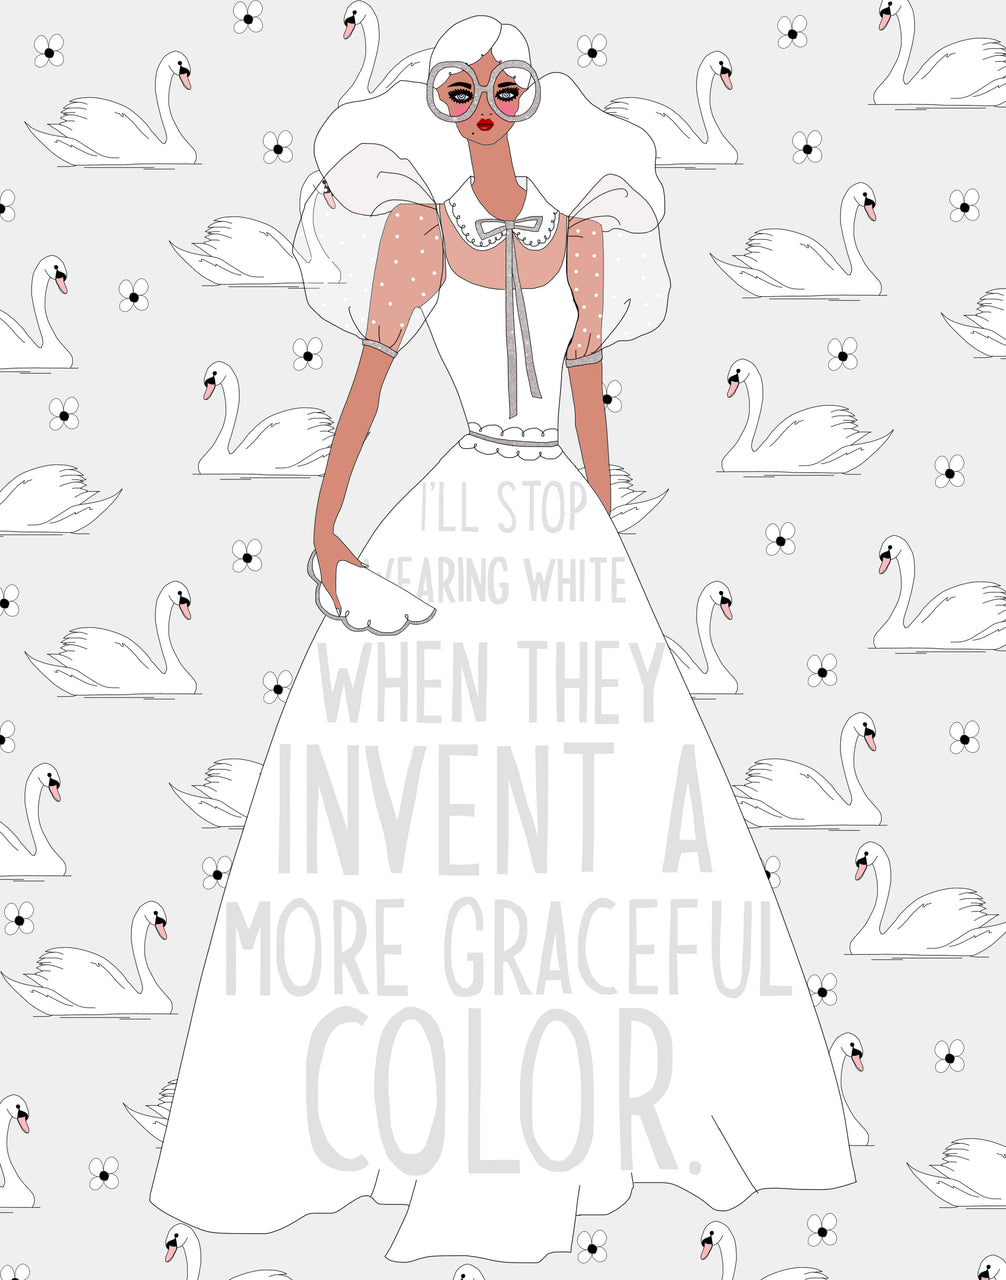 I'll Stop Wearing White When They Invent a More Graceful Color (GREETING CARD)